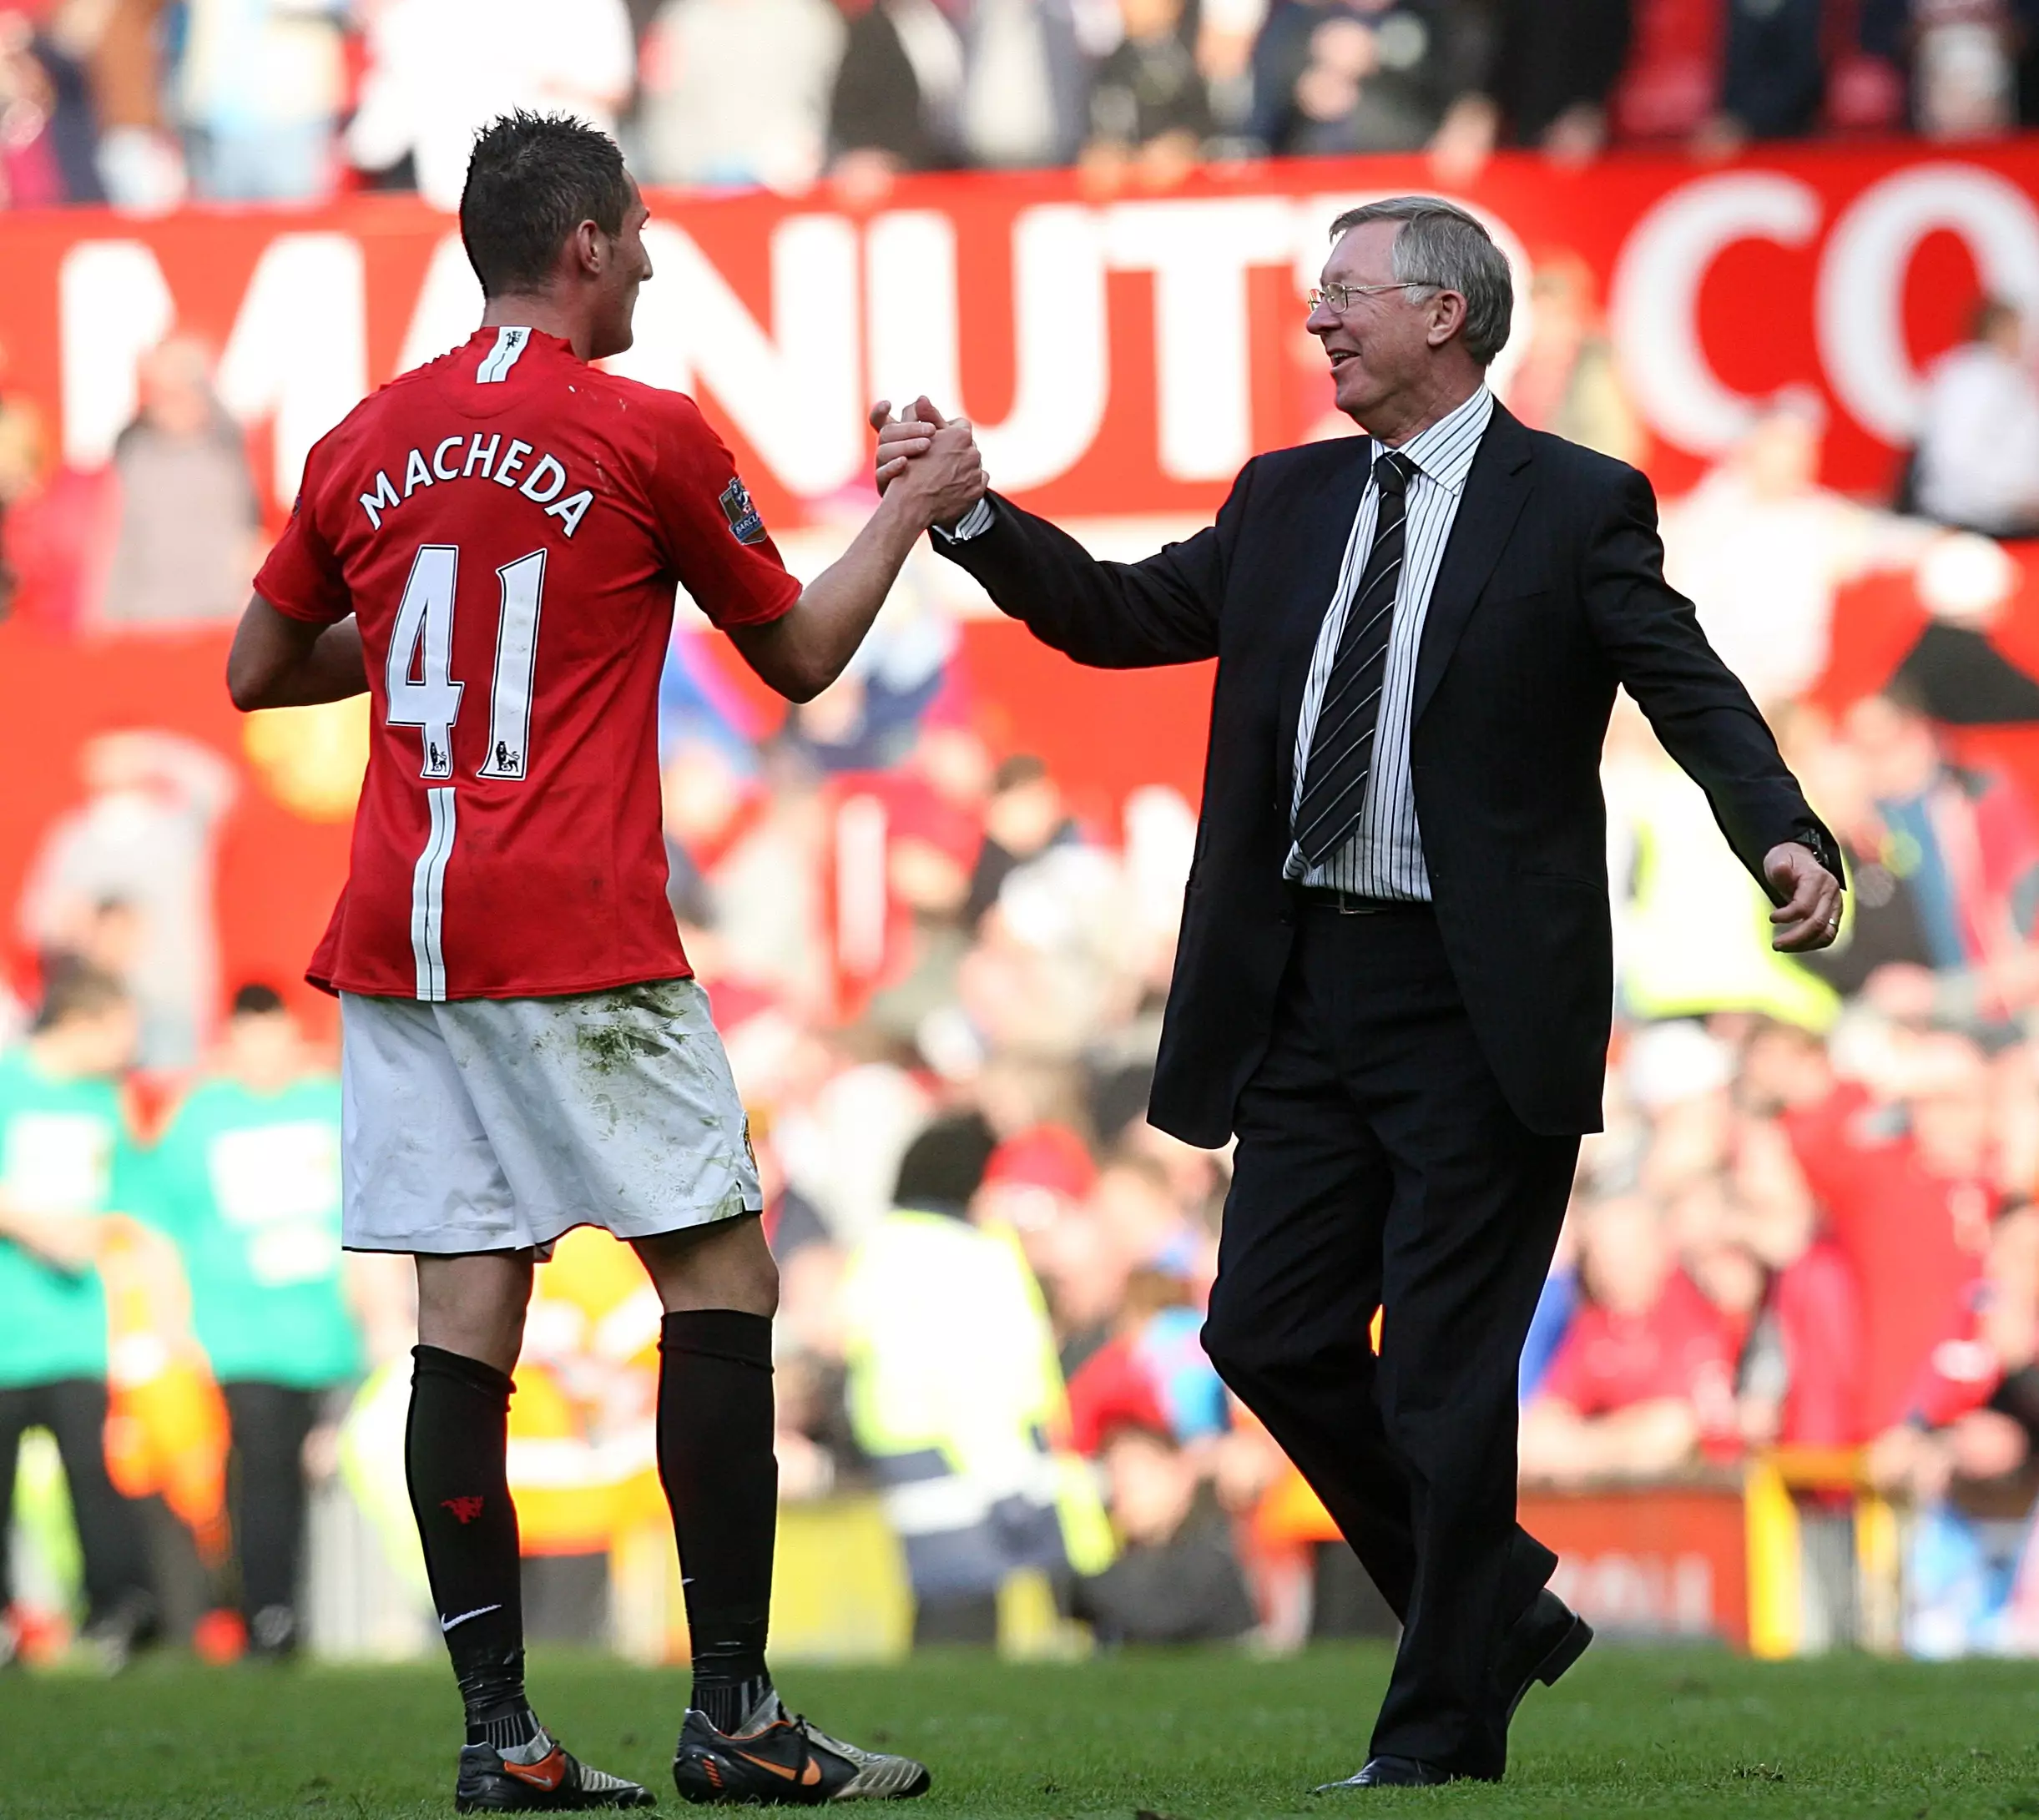 Macheda is congratulated by Sir Alex. Image: PA